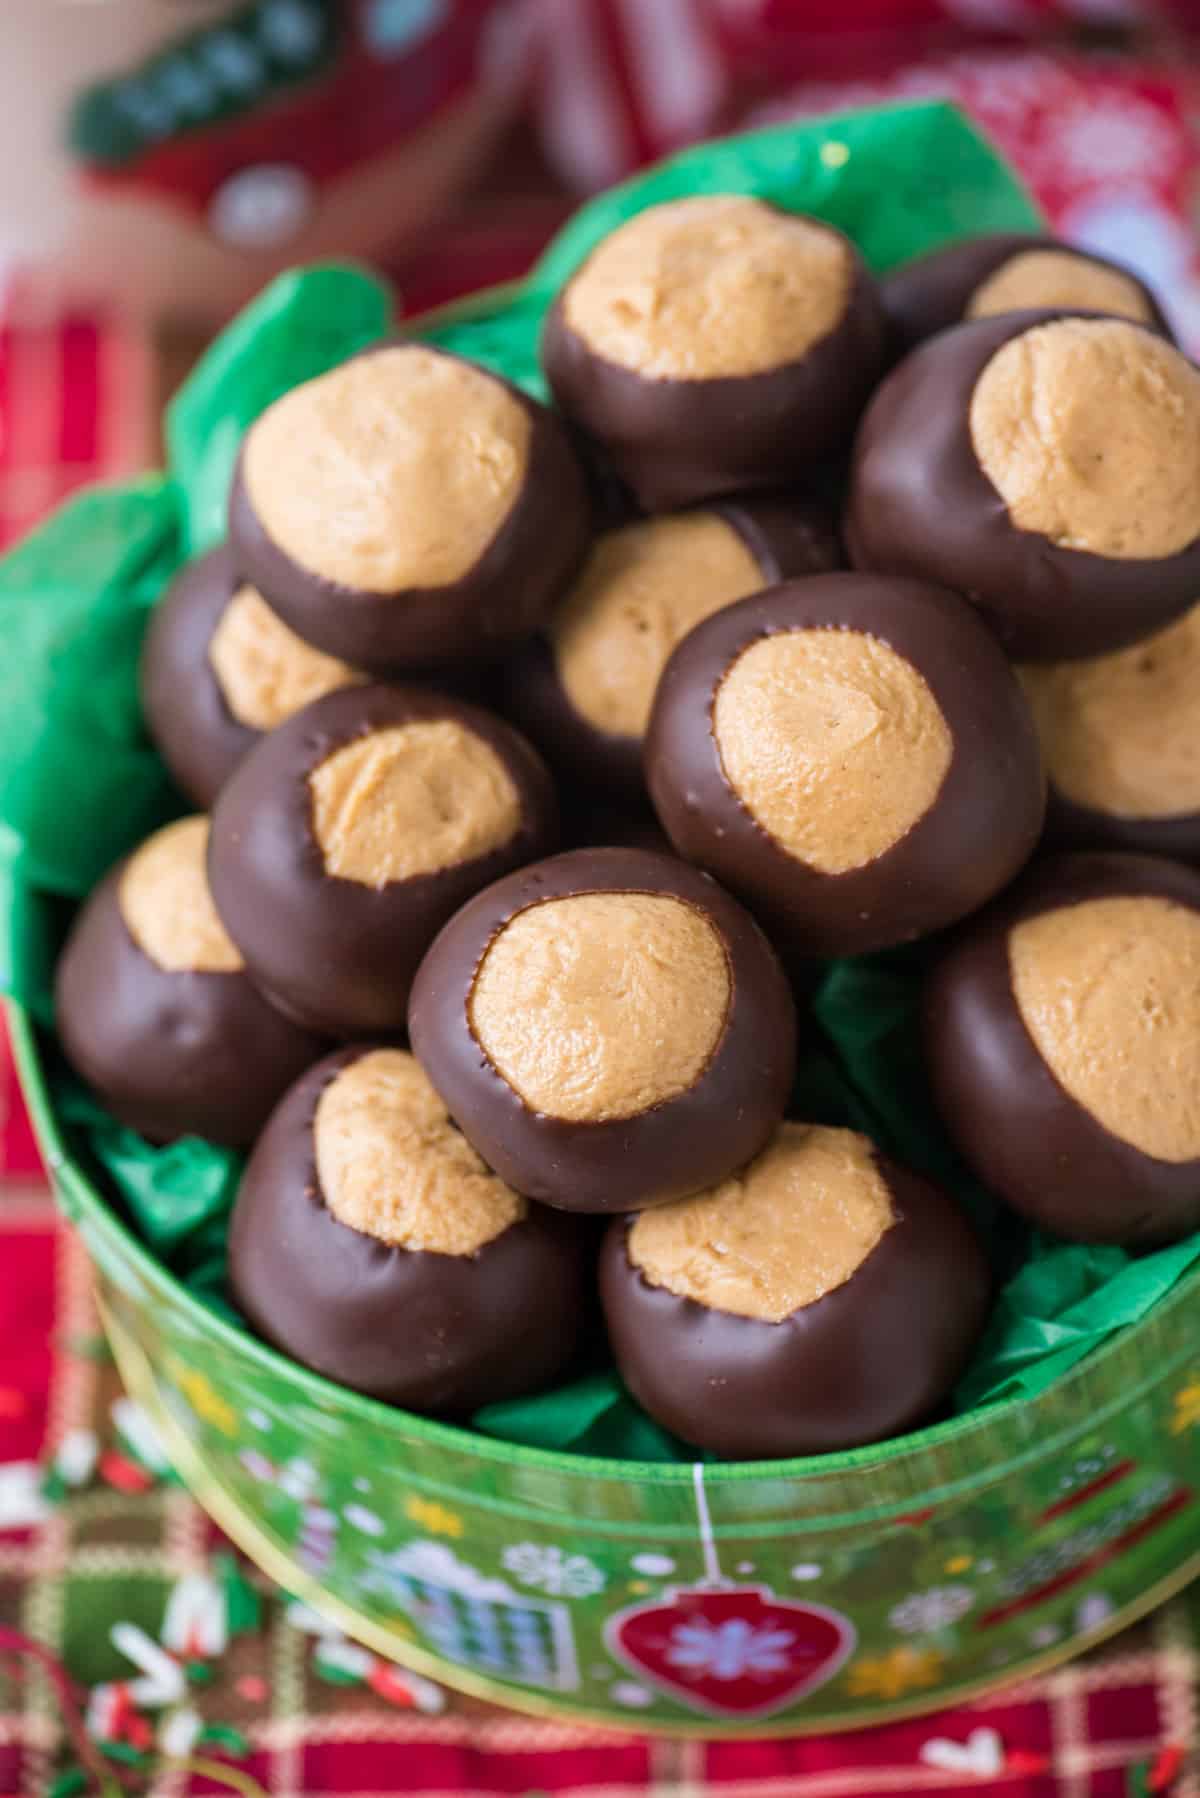 peanut butter balls in green christmas cookie tin on red striped towel background